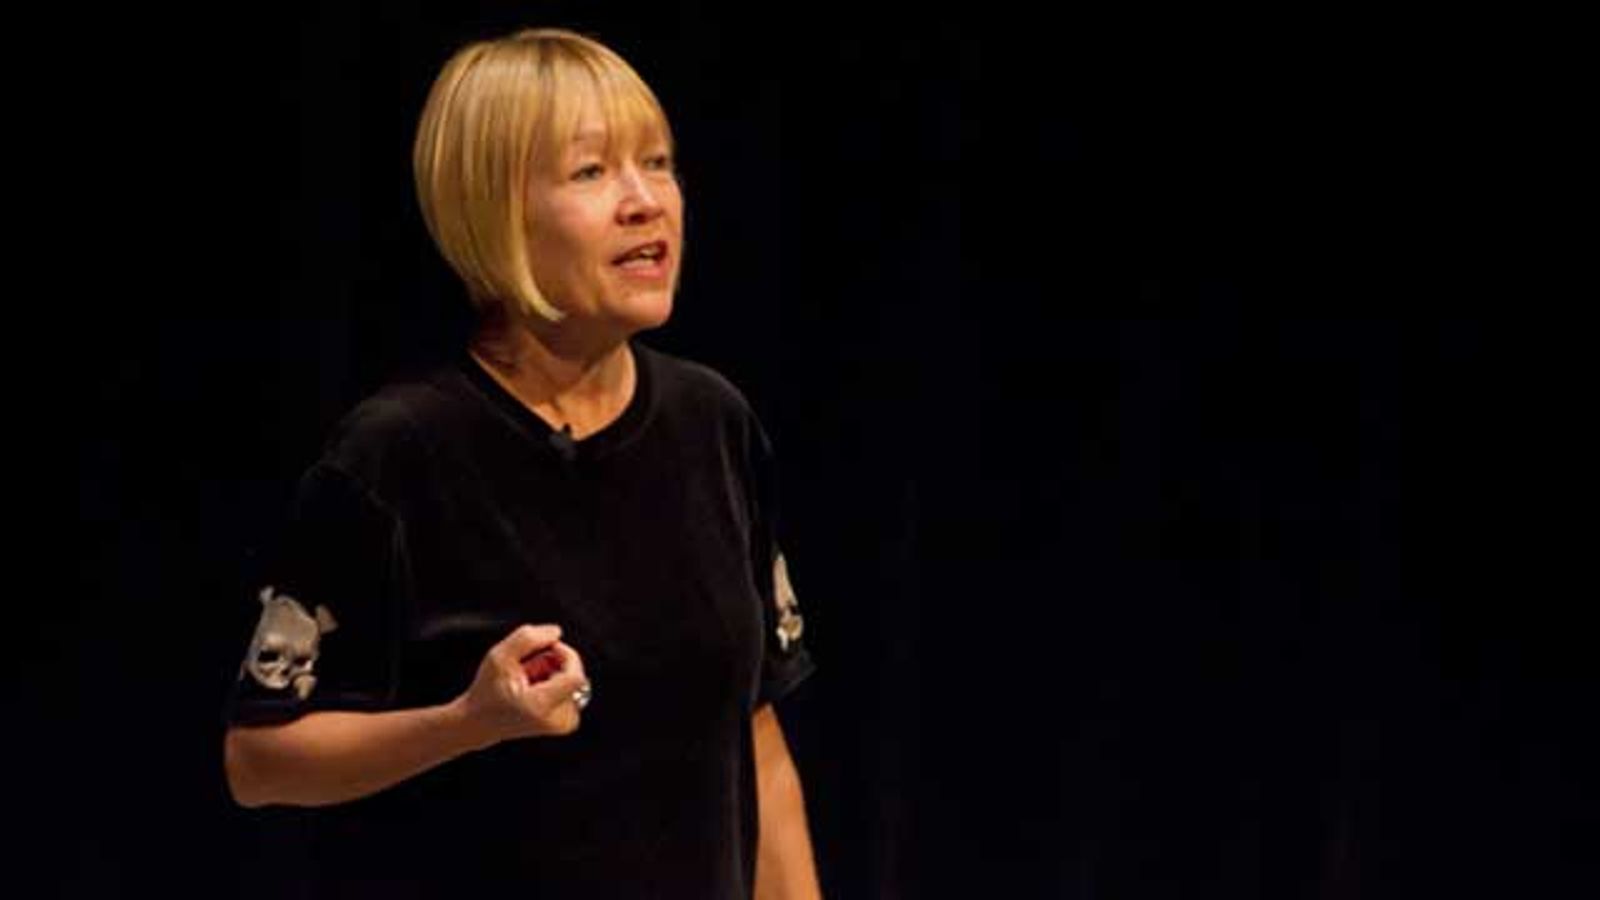 Cindy Gallop Gets Grief for “Pay Off Tuition with Sex Tape” Spiel